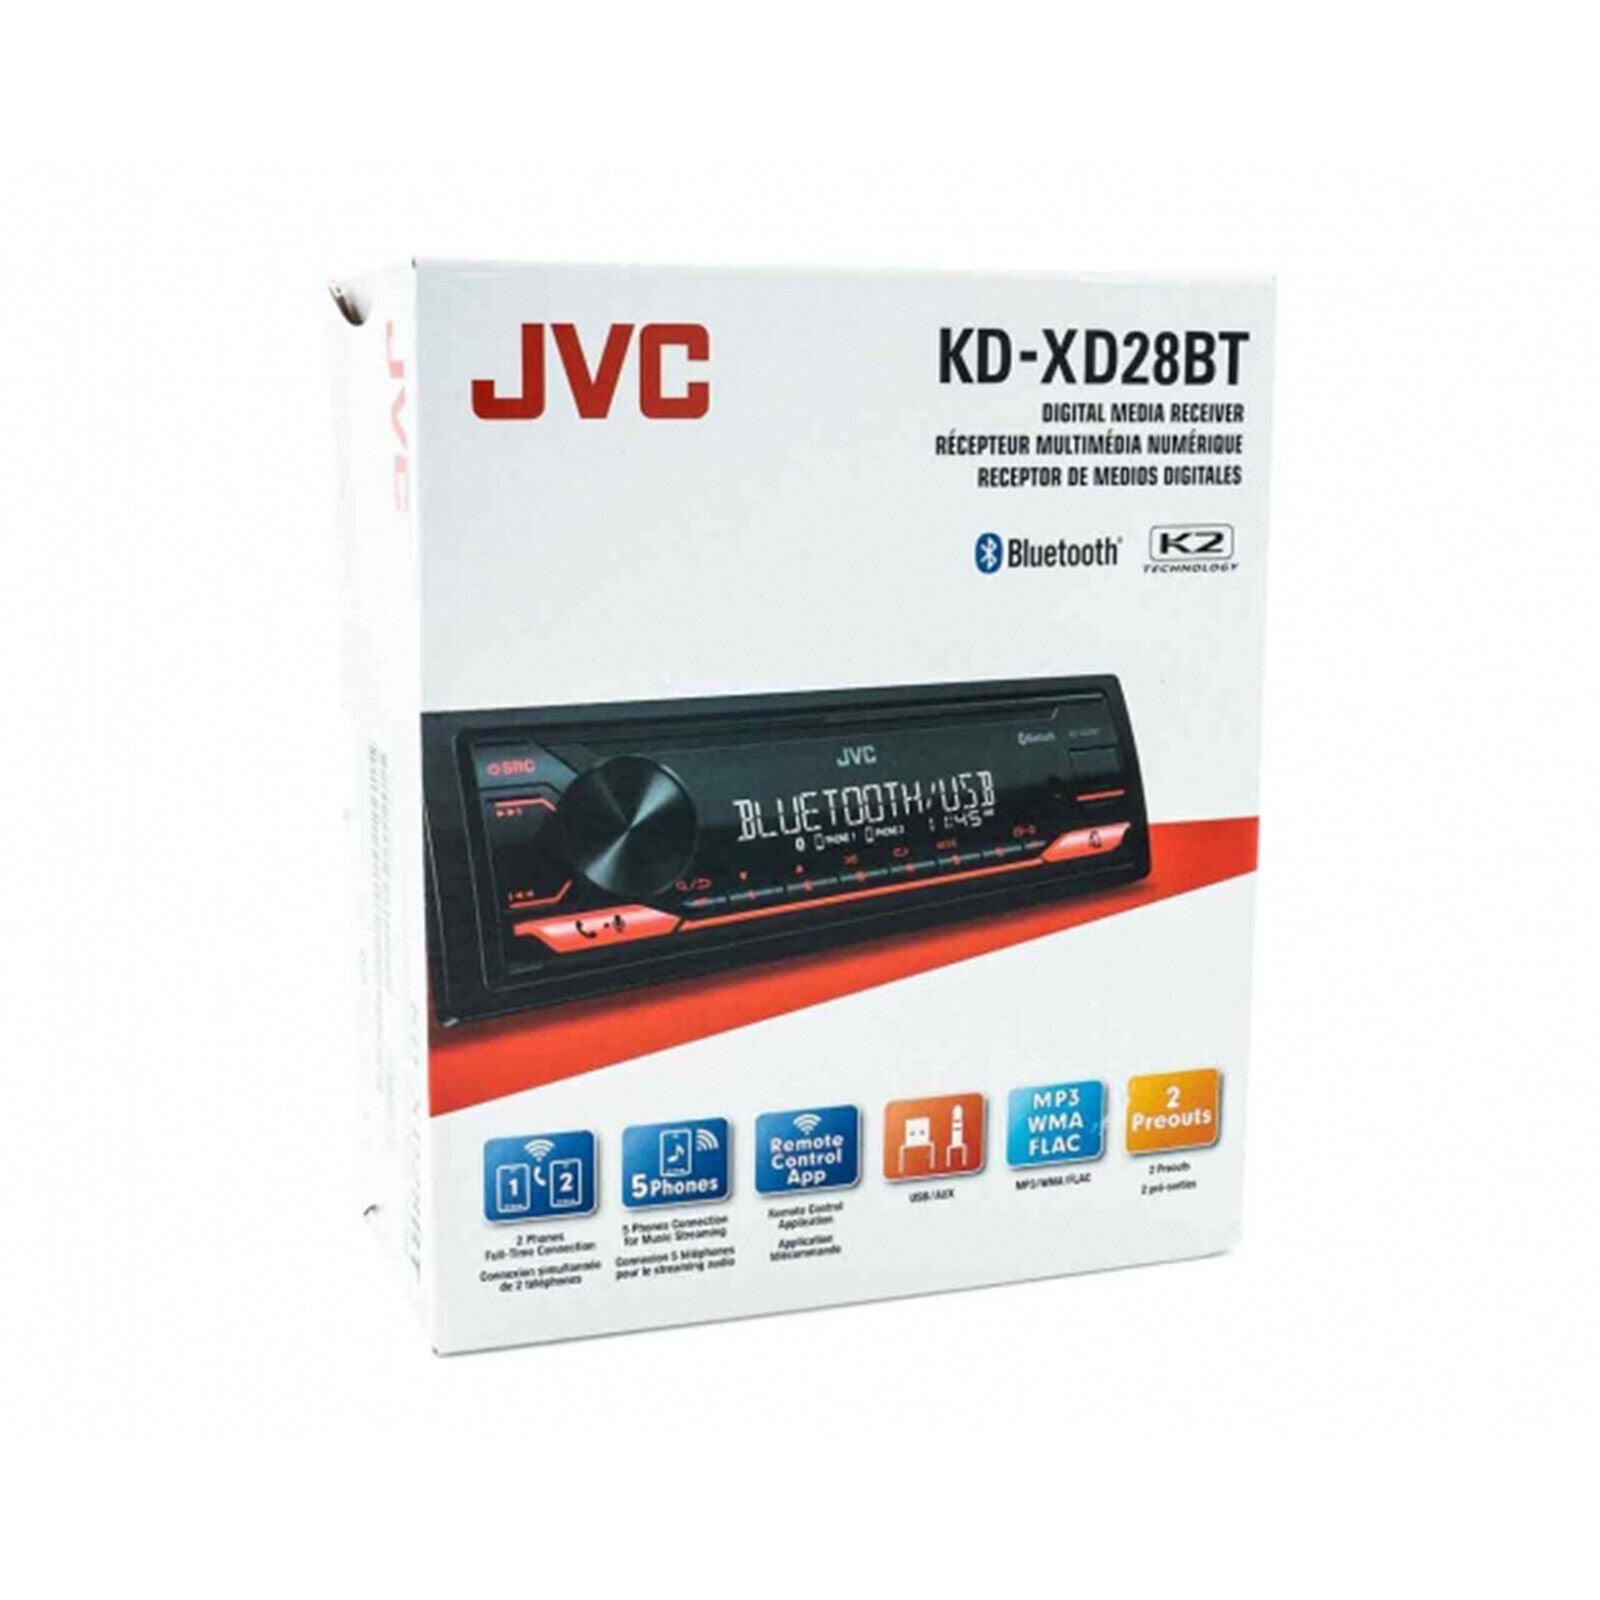 JVC KD-XD28BT Single DIN Digital Media Shallow Chasis Receiver with Bluetooth with 6x9" and 6.5" JVC Speakers